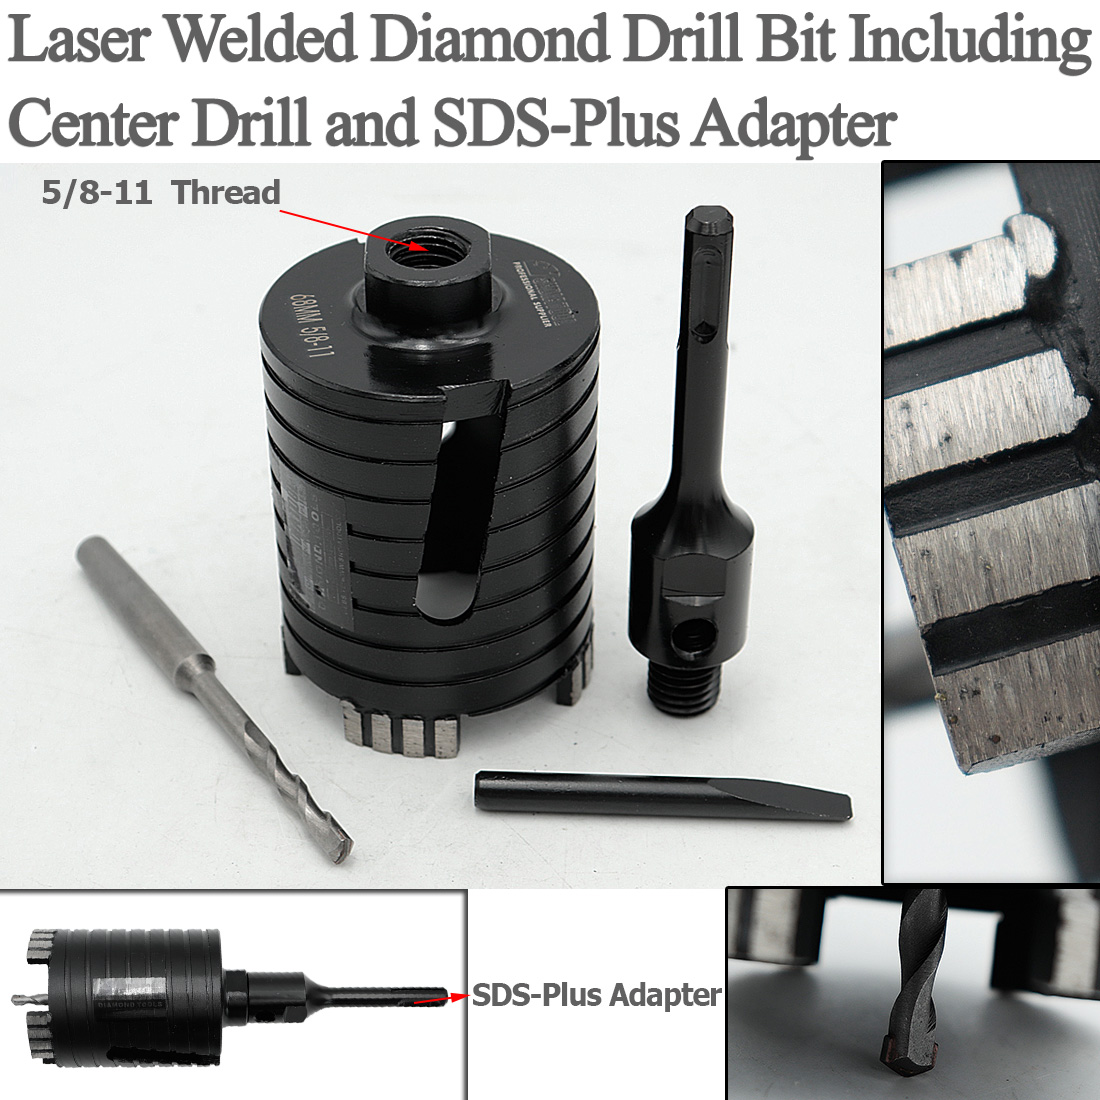 SHDIATOOL 2pcs Dia 68mm 5/8-11 Thread Laser Welded Diamond Core Drill Bit Including Center Drill and SDS-Plus Adapter